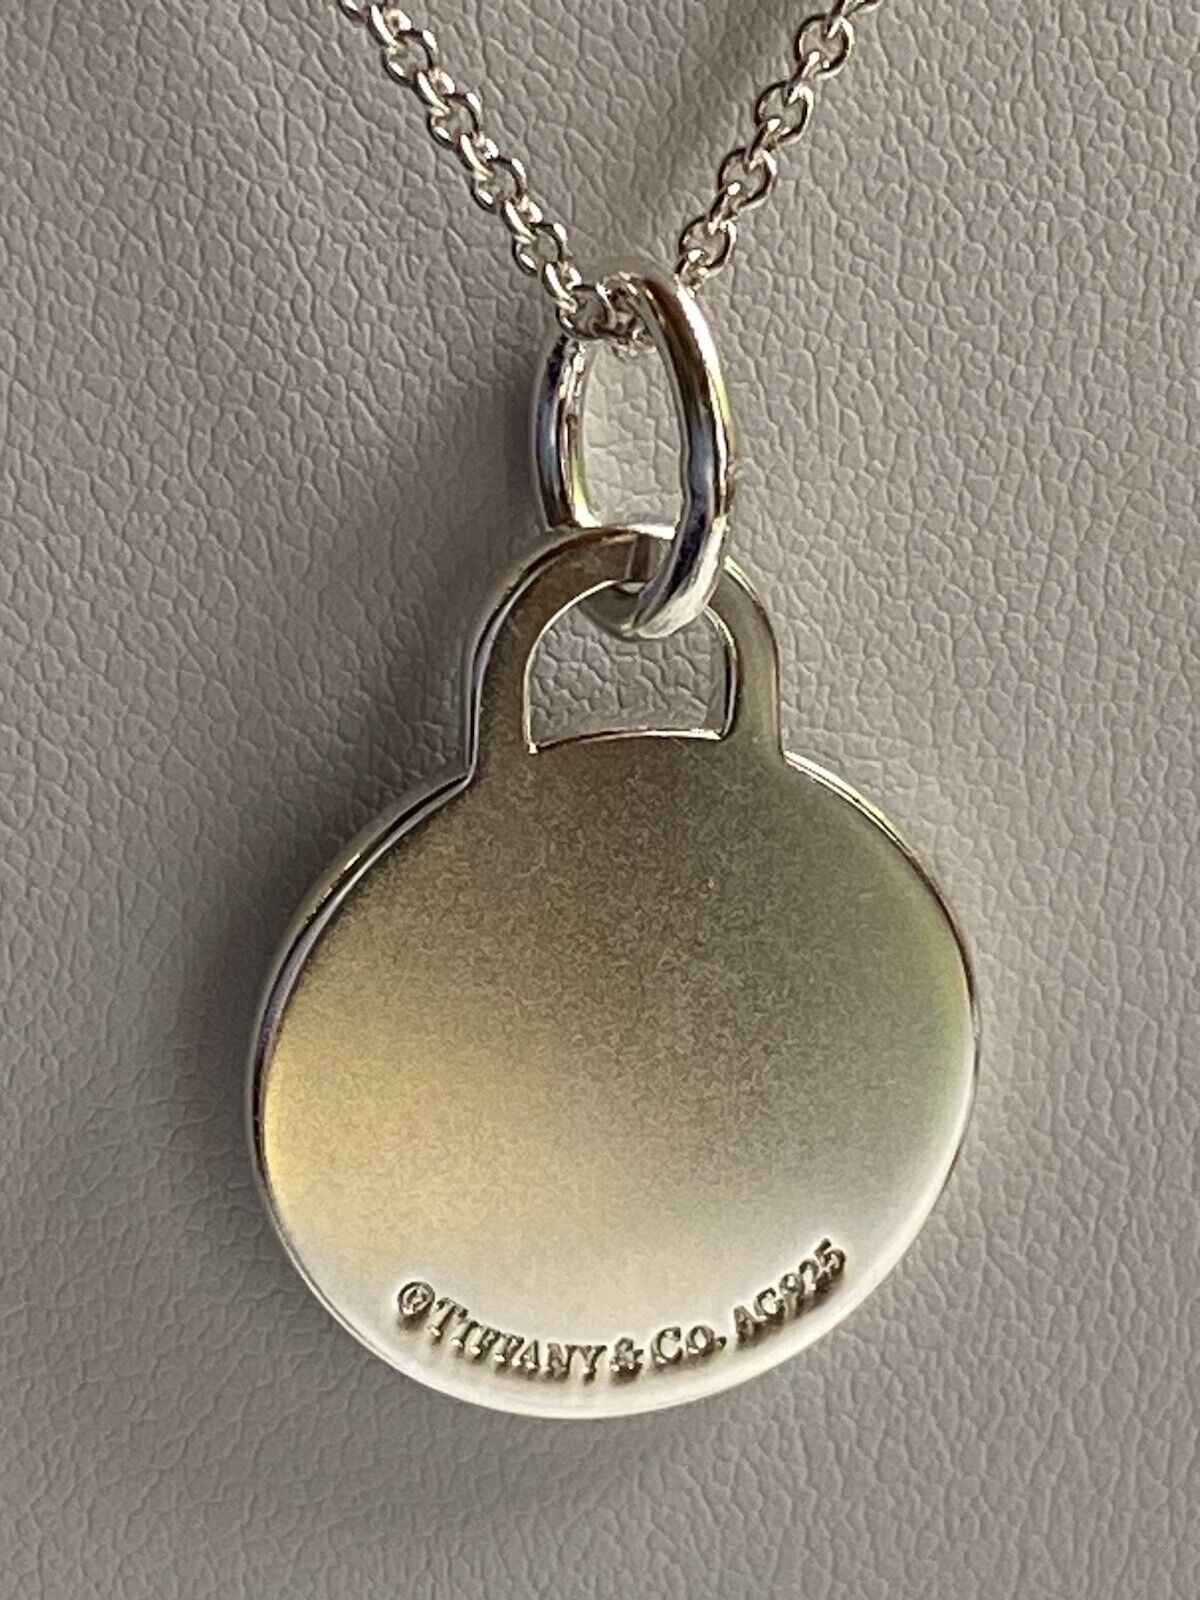 Tiffany & Co. Sterling Round Tag 2001 Engravable Charm Pendant Necklace 18”